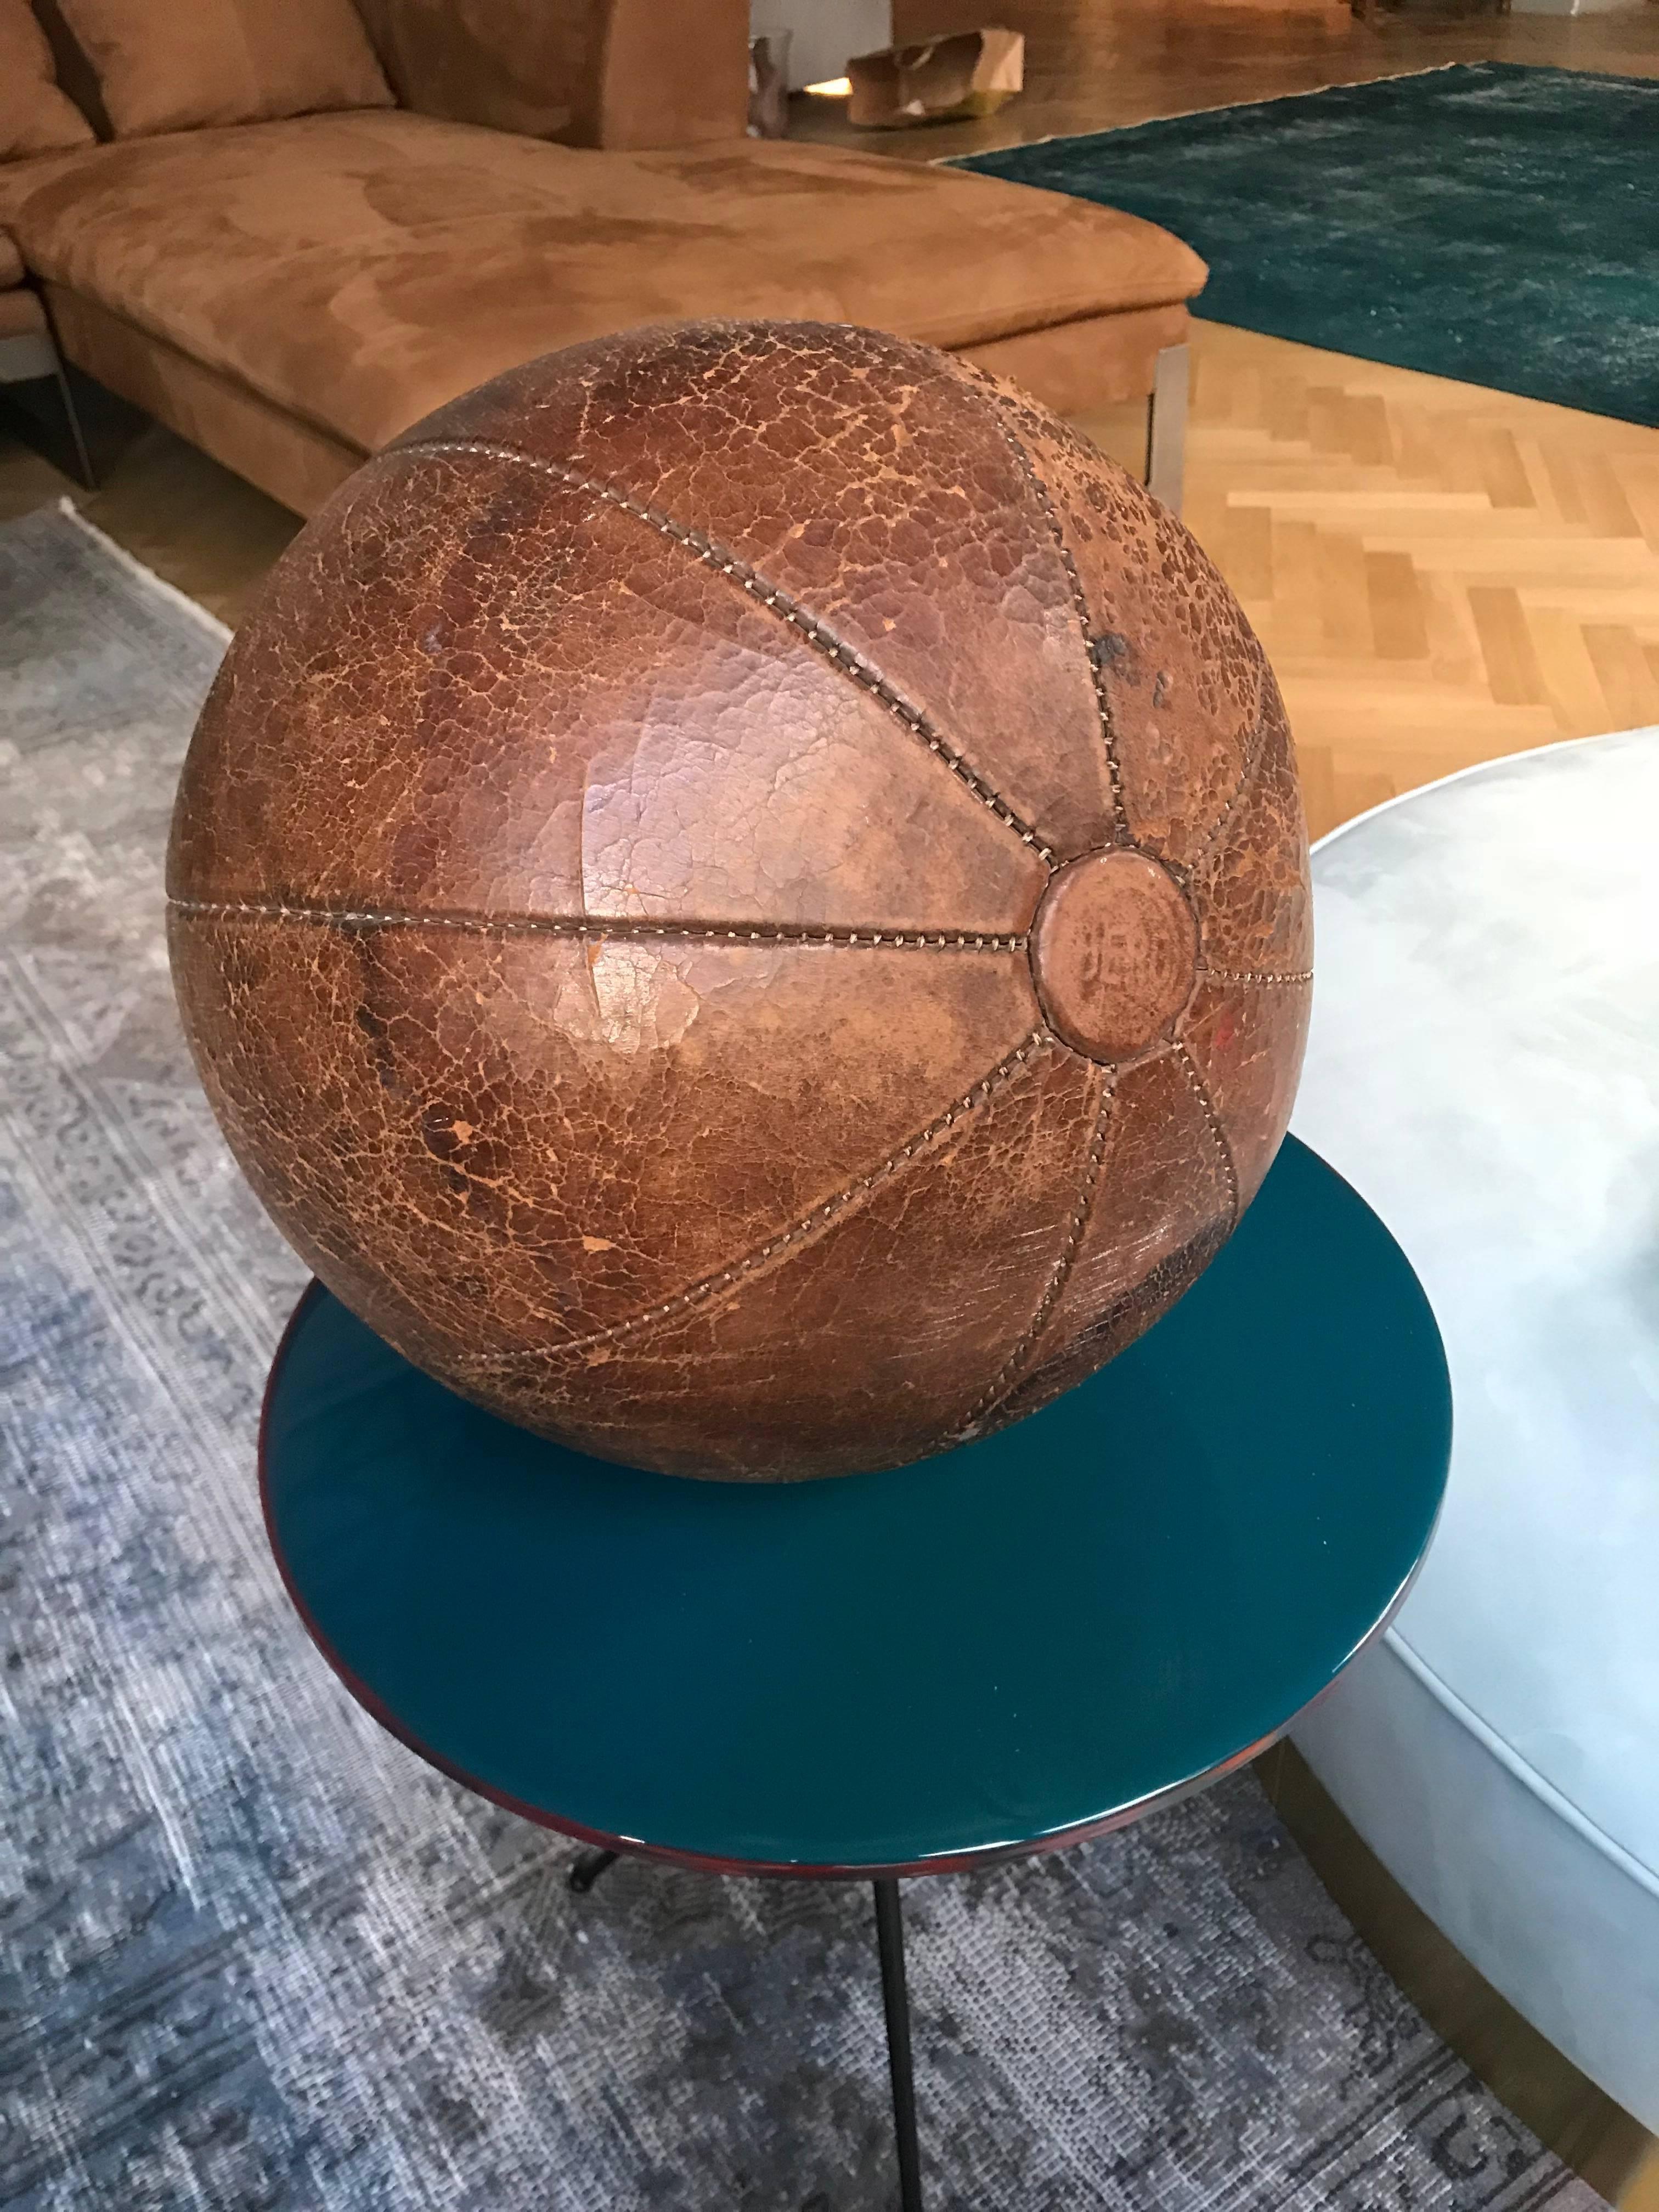 The medicine ball is part of a big collection from the 1920s-1930s, the time of the first gym enthusiasts in Germany.
The ball is handmade and filled with horse hair.
All balls are in a very good condition with nice patina and an intense color.